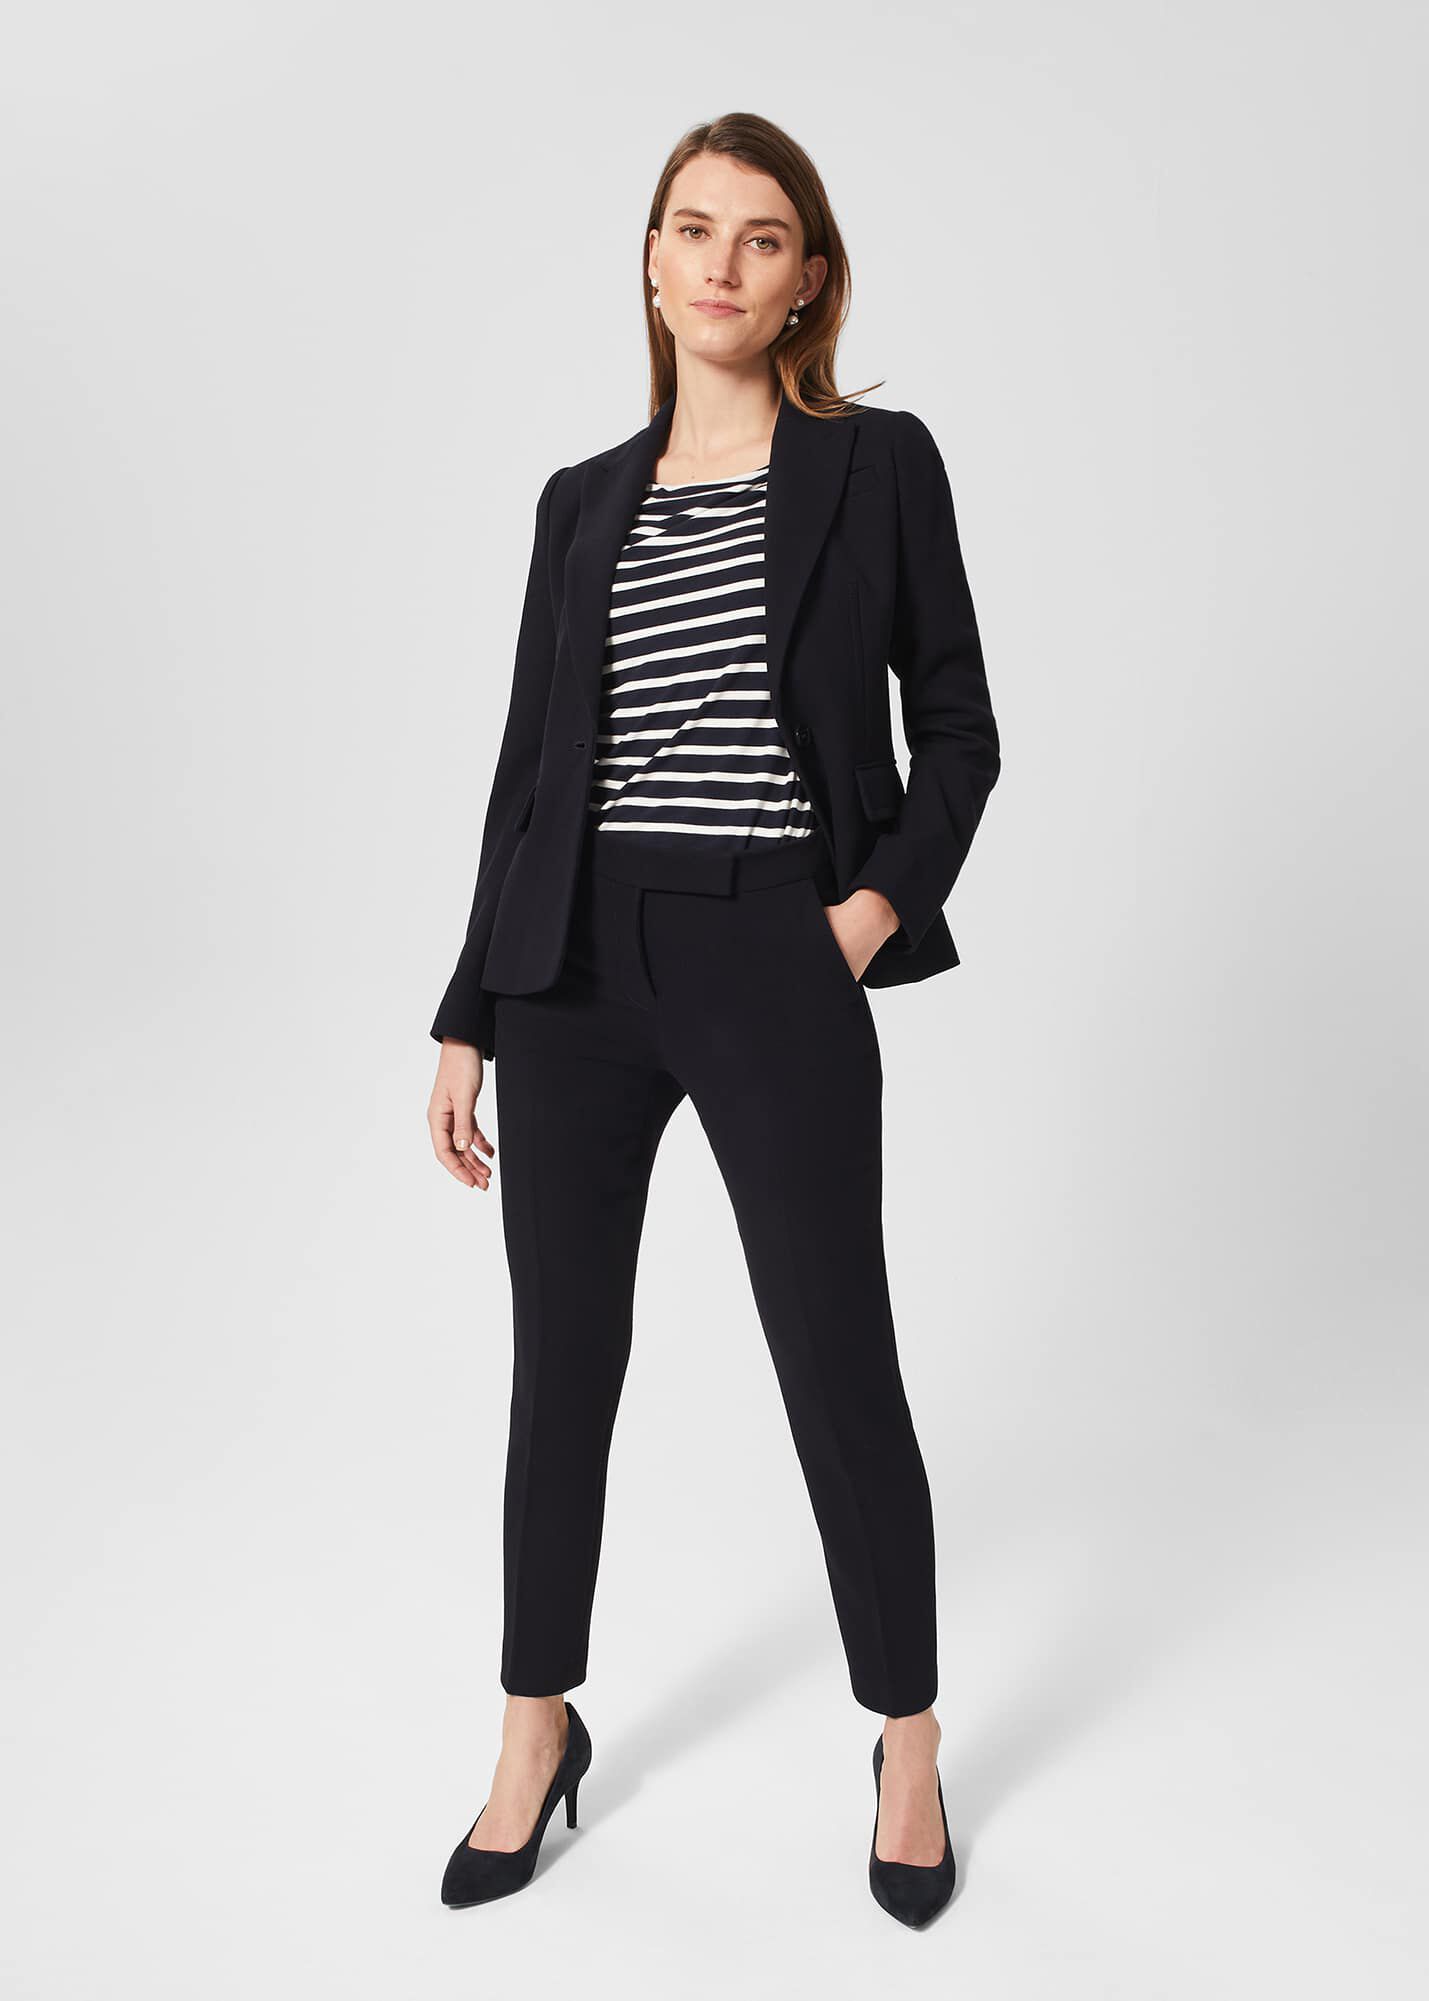 TeresaCollections - Jacket and Pants Navy Blue Two Button Women Business  Suits